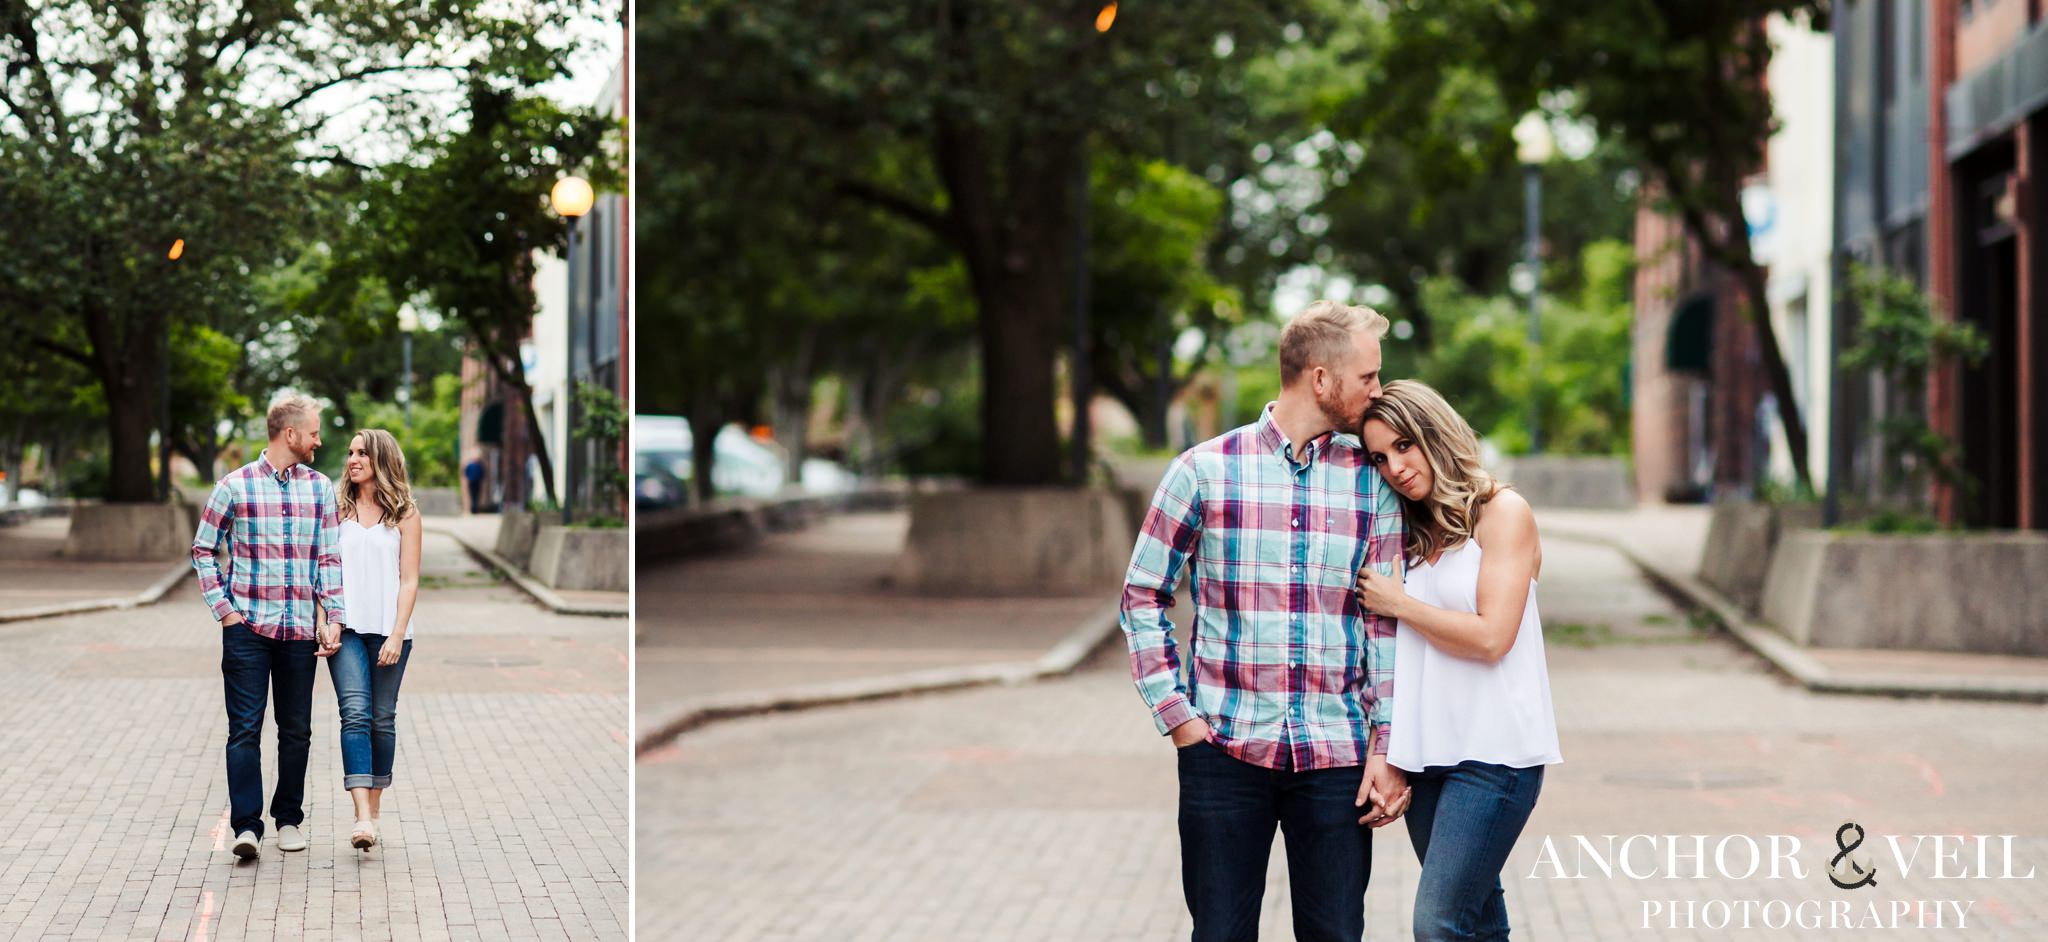 Unique Raleigh Engagement Sessions 9